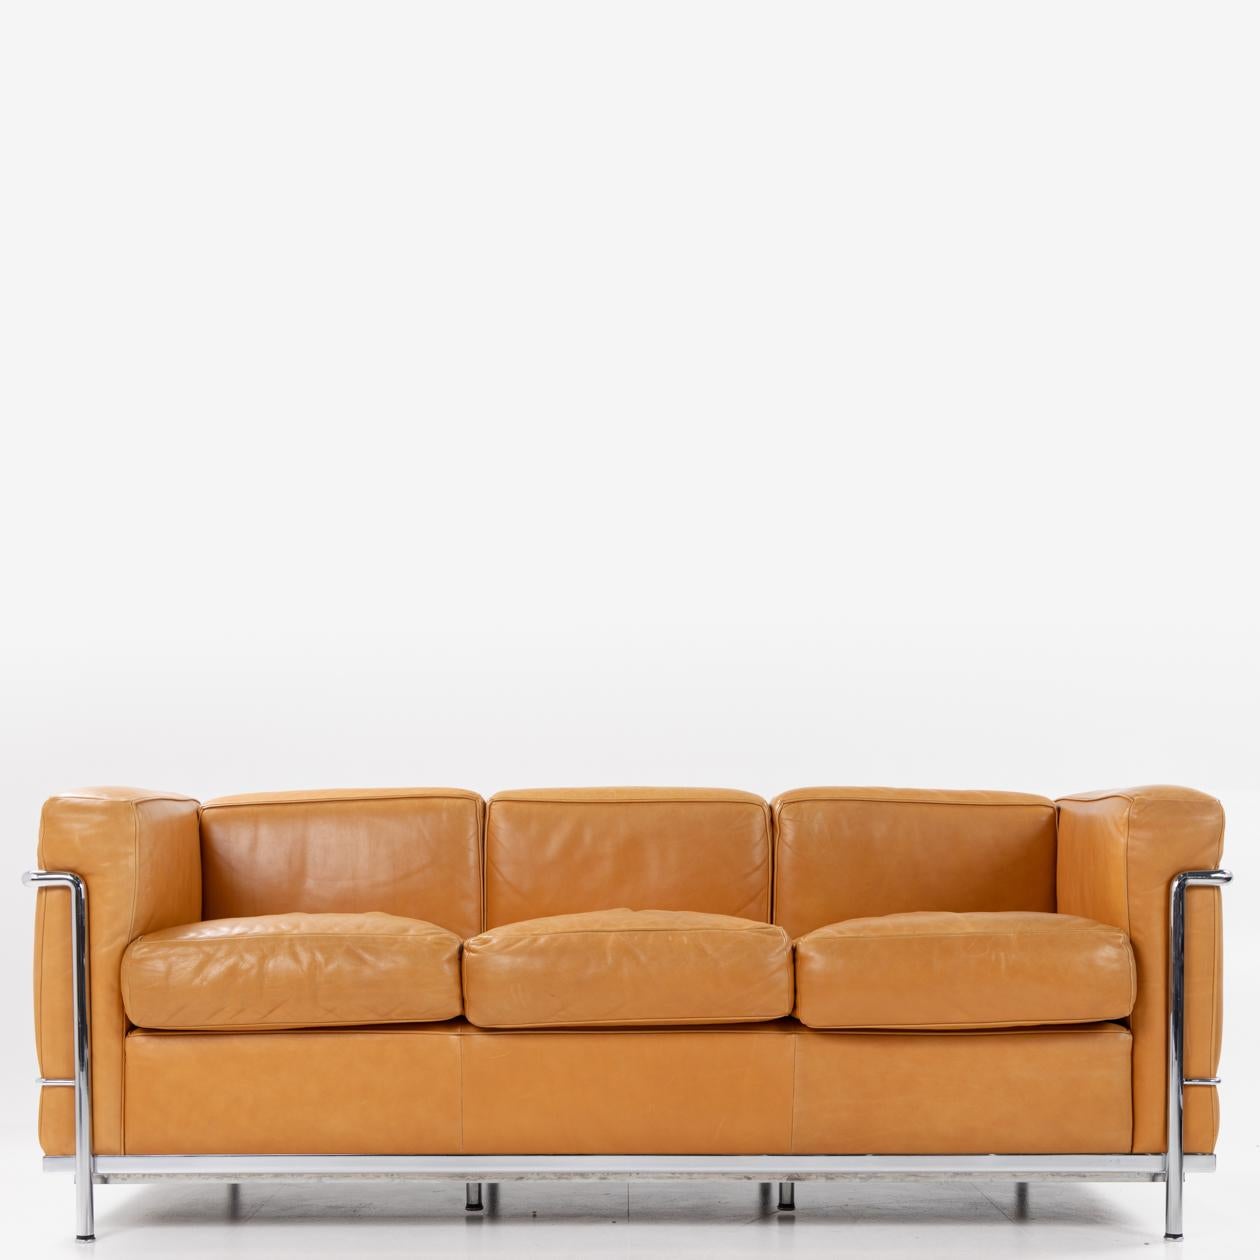 LC 3 three seater sofa by Le Corbusier 1